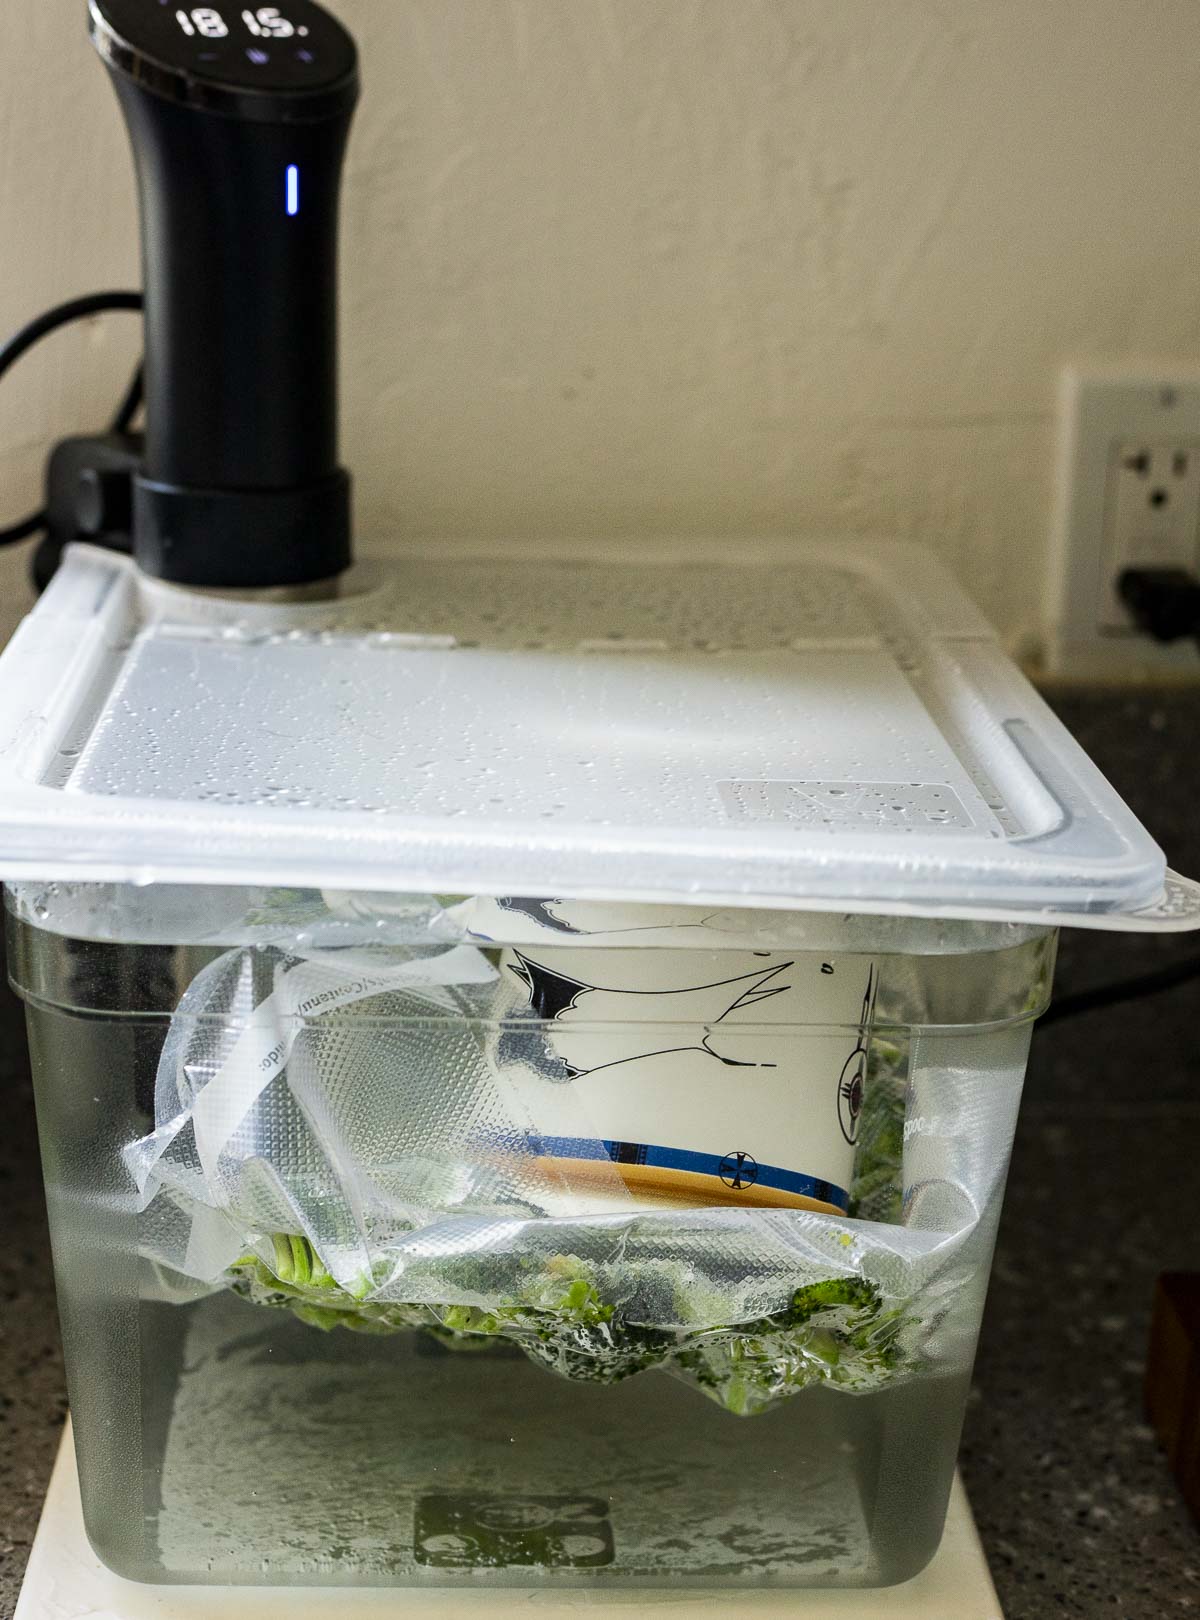 Broccoli cooking in the sous vide water bath.